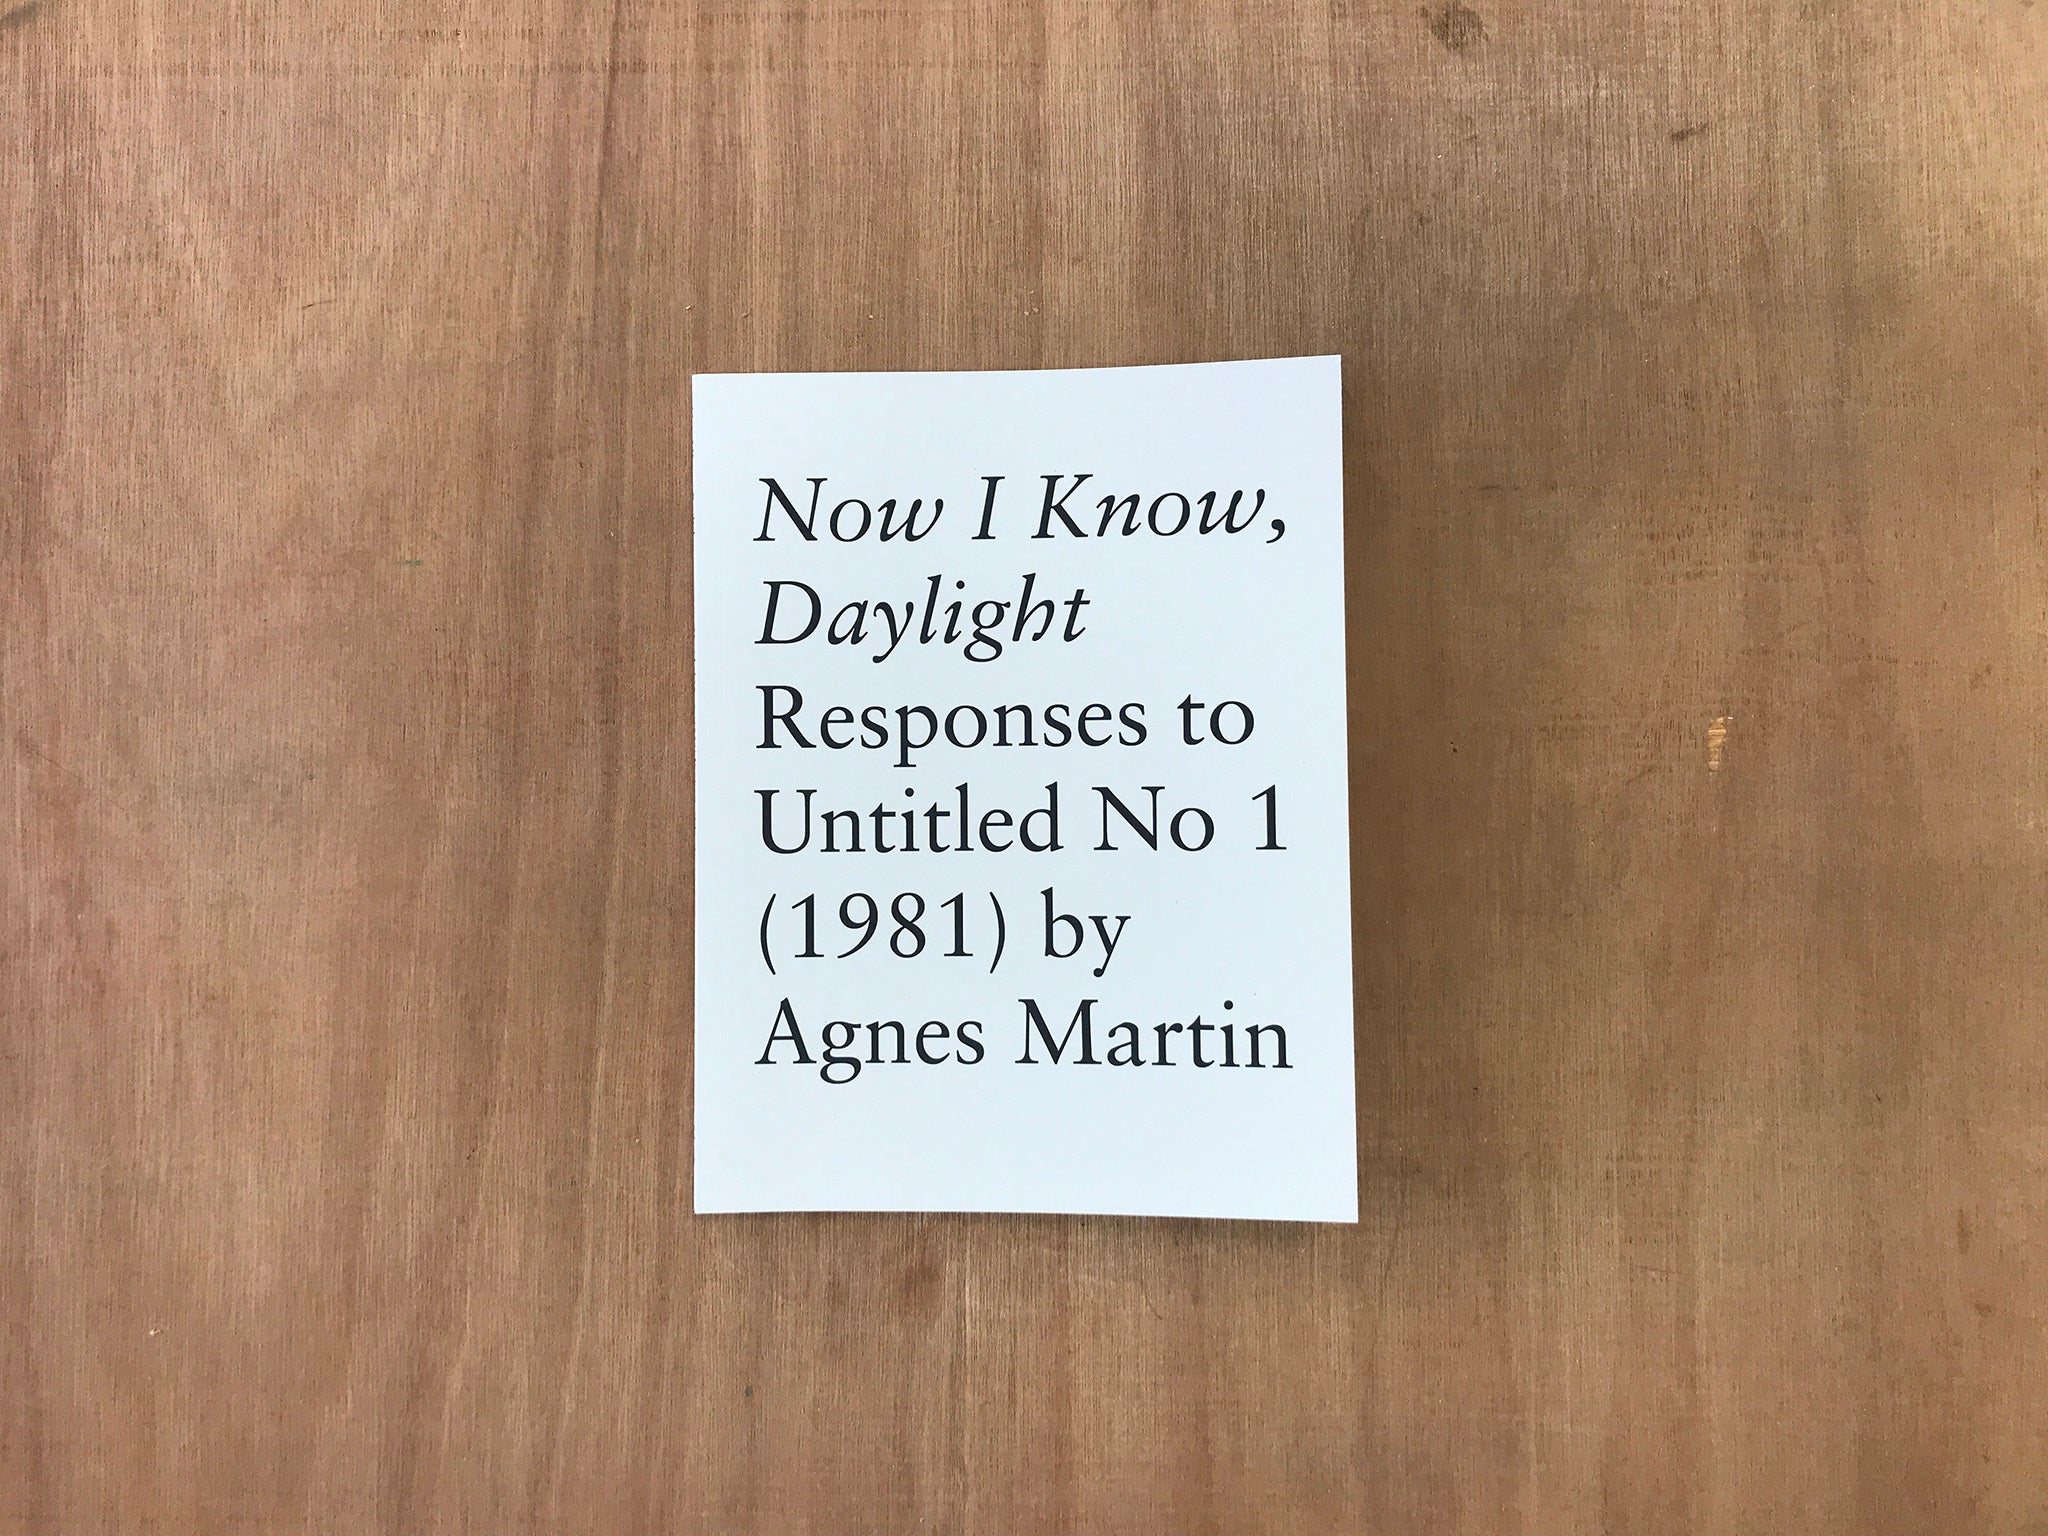 NOW I KNOW, DAYLIGHT: RESPONSES TO UNTITLED NO 1 (1981) BY AGNES MARTIN by Various Artists